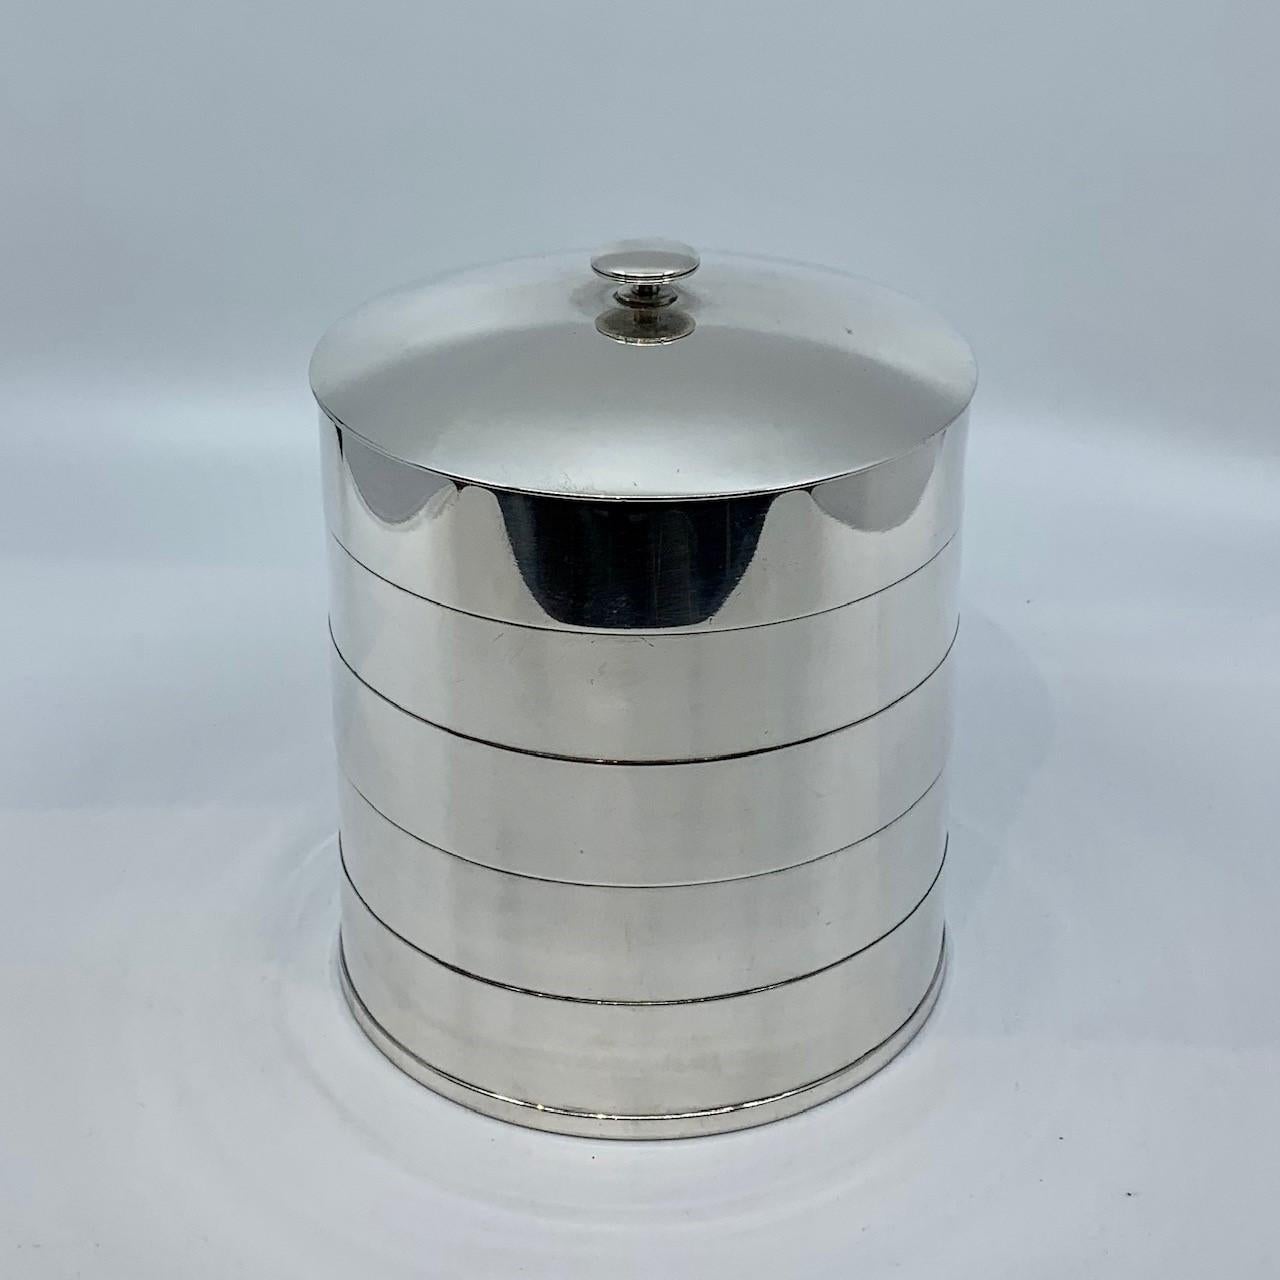 A vintage sterling silver Georg Jensen Art Deco cookie jar, designed by Jorgen Jensen circa 1935. The body is a round cylinder form adorned with four oxidized lines. The top is curved with a simple Deco handle. This piece is perhaps unique, it has